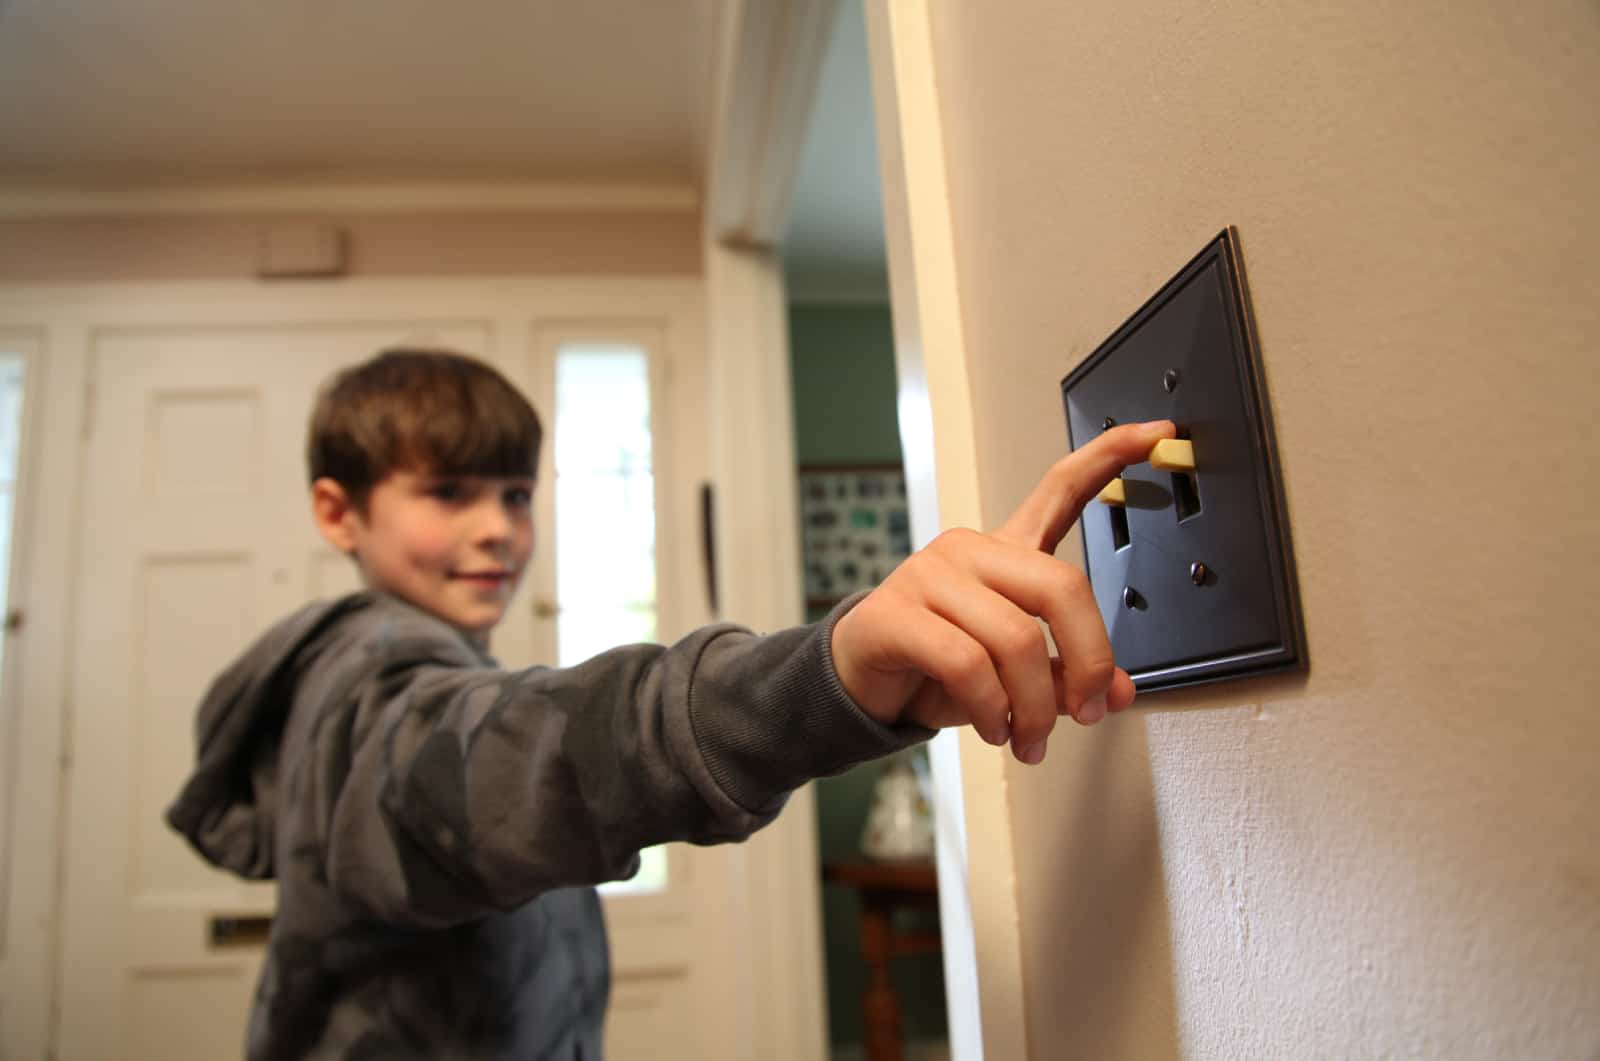 Young man is seen switching off the lights to save energy.